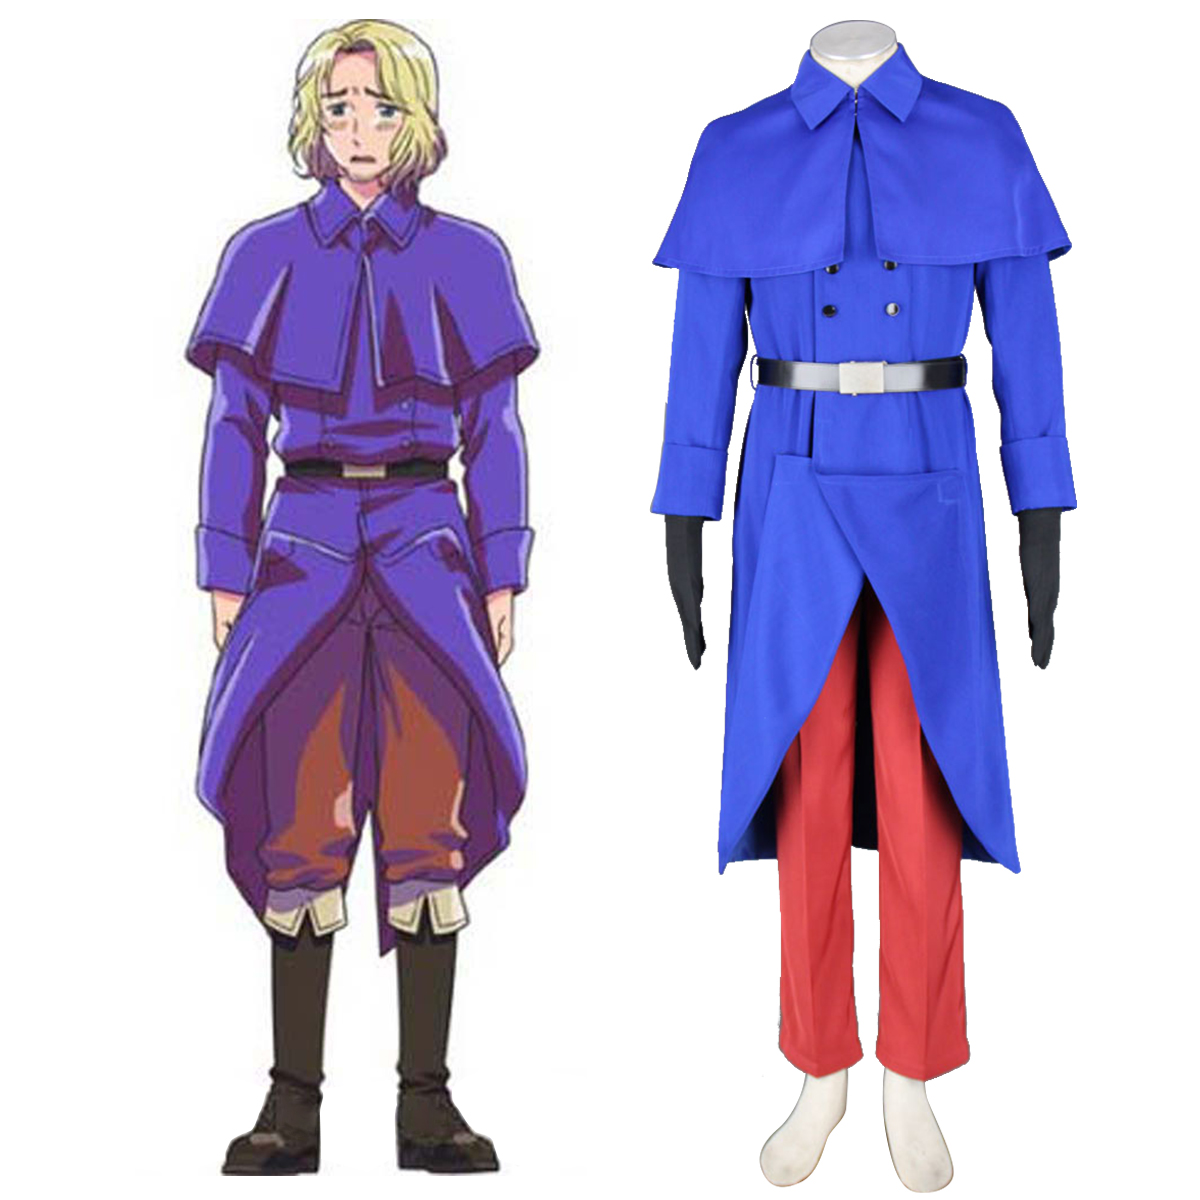 Axis Powers Hetalia France Francis Bonnefeuille 1 Anime Cosplay Costumes Outfit